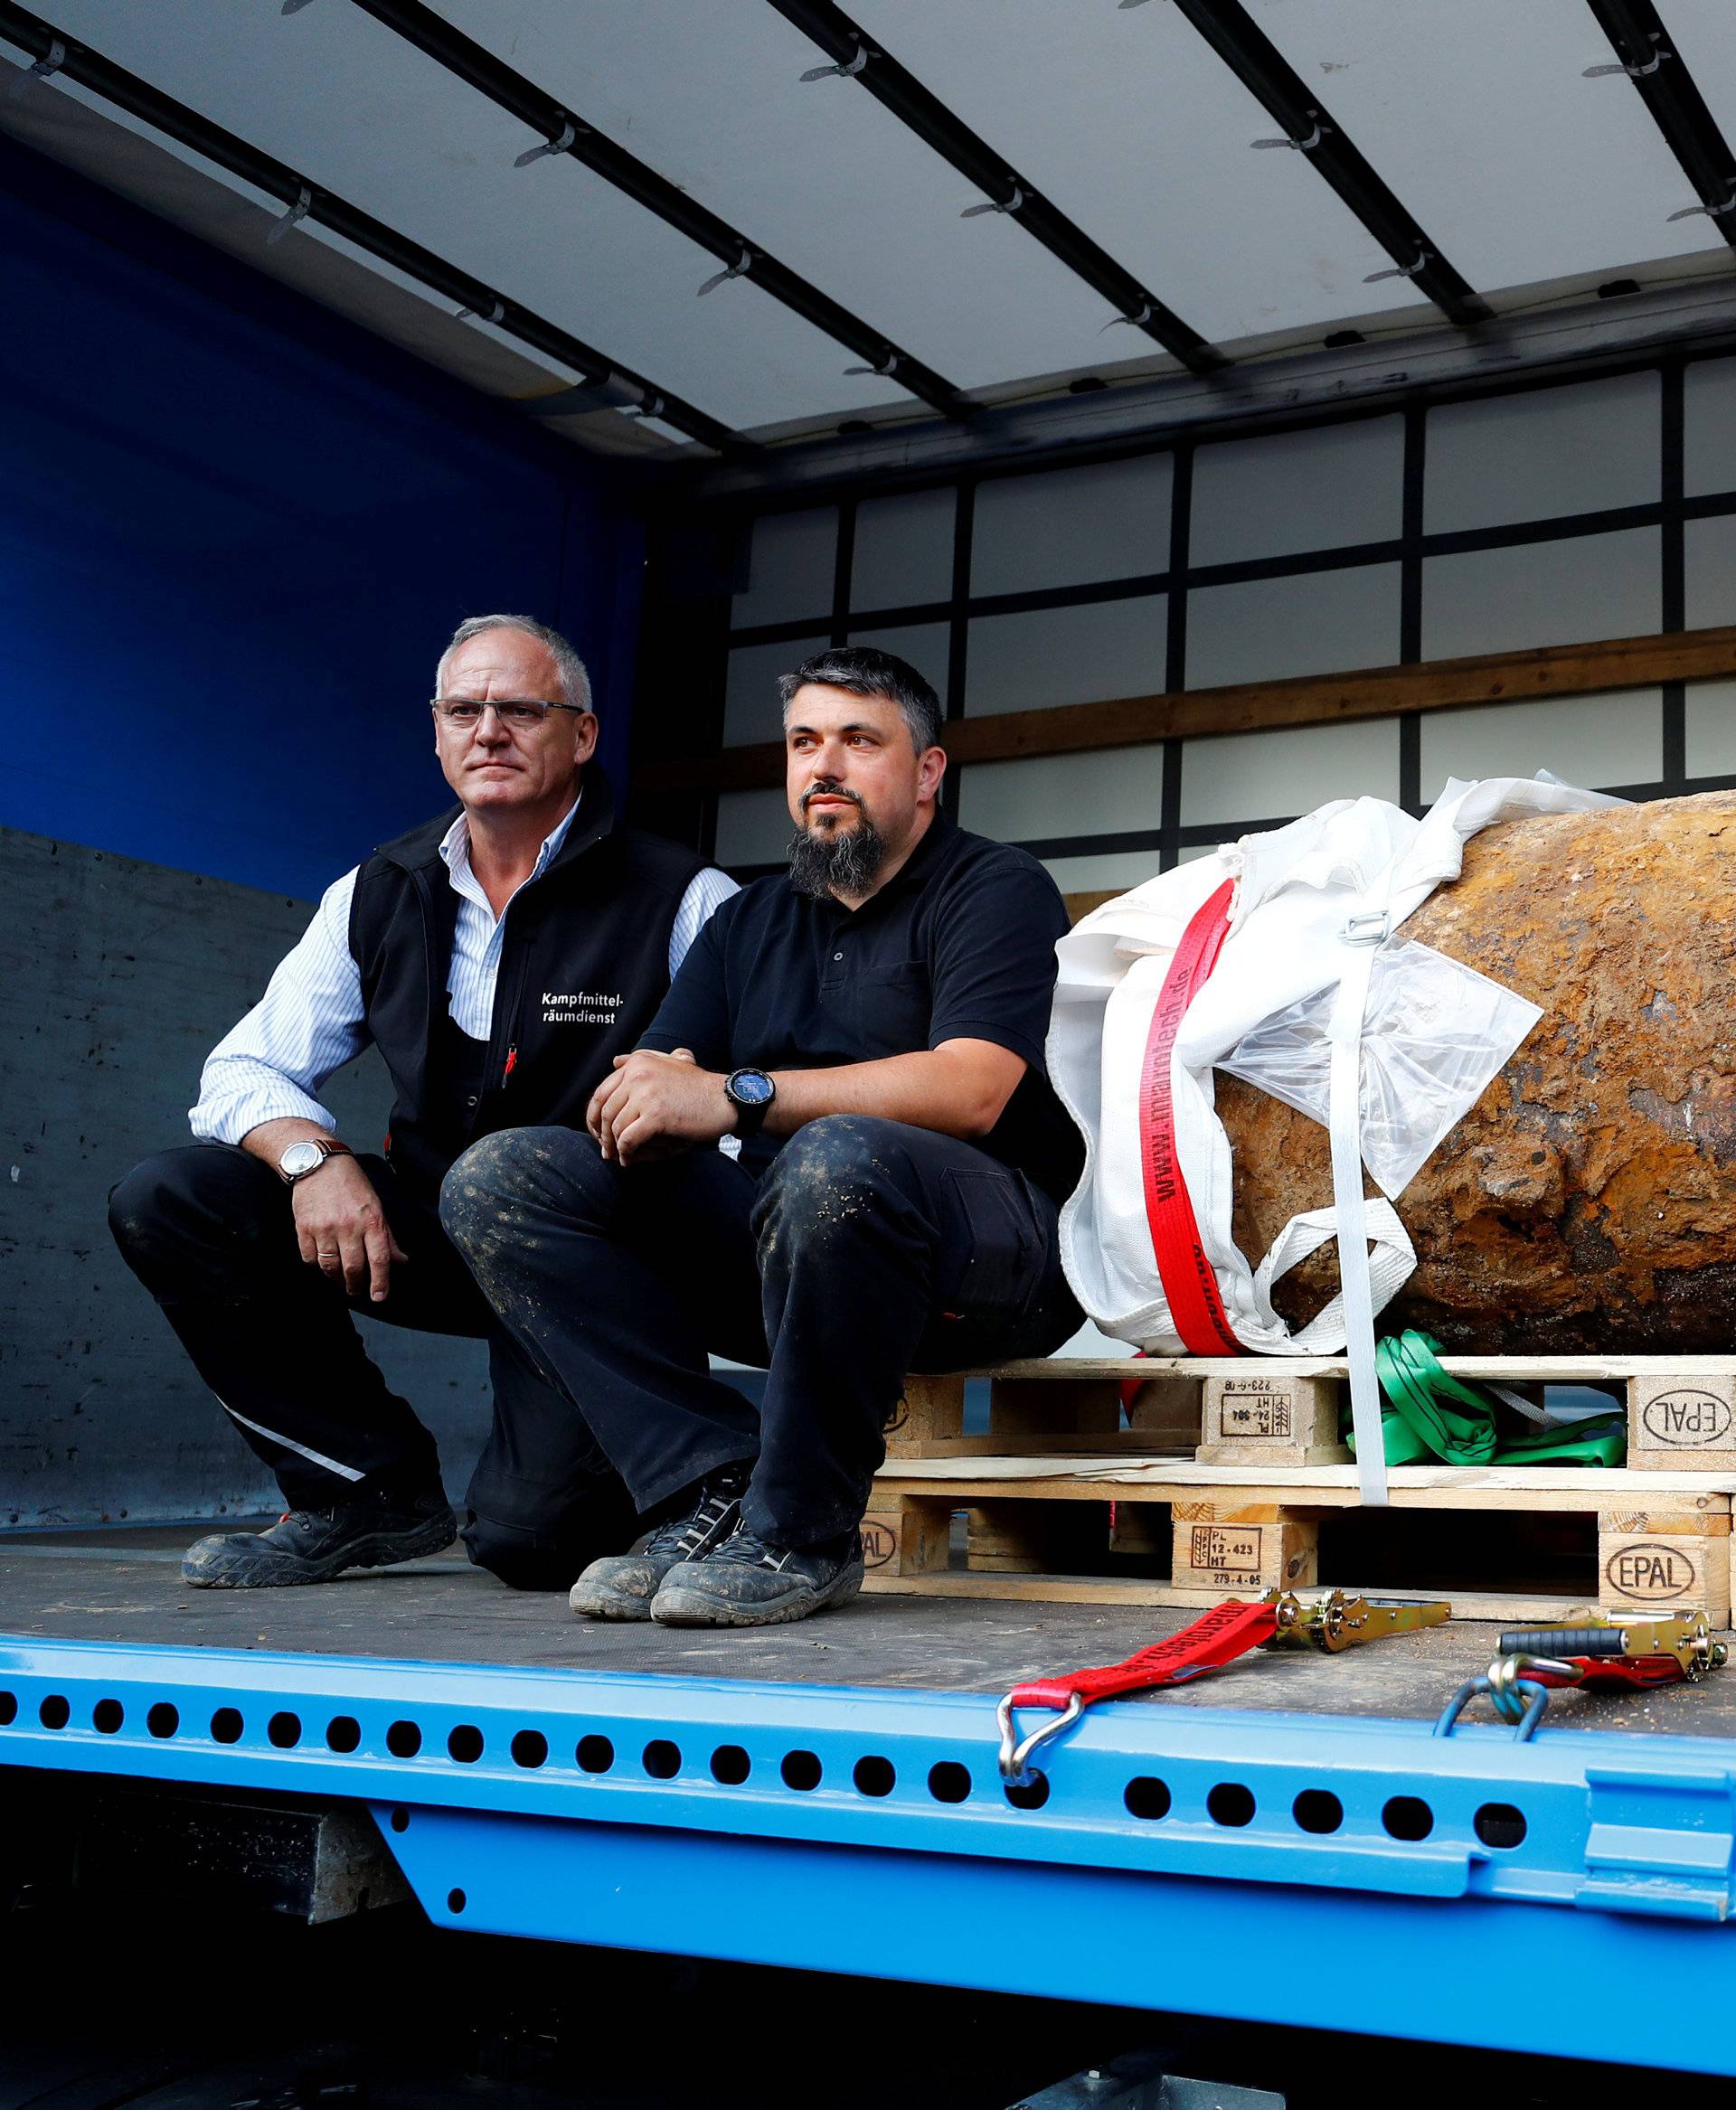 Bomb disposal expert Rene Bennert and Dieter Schweizler speak next to defused massive World War Two bomb after tens of thousands of people evacuated their homes in Frankfurt